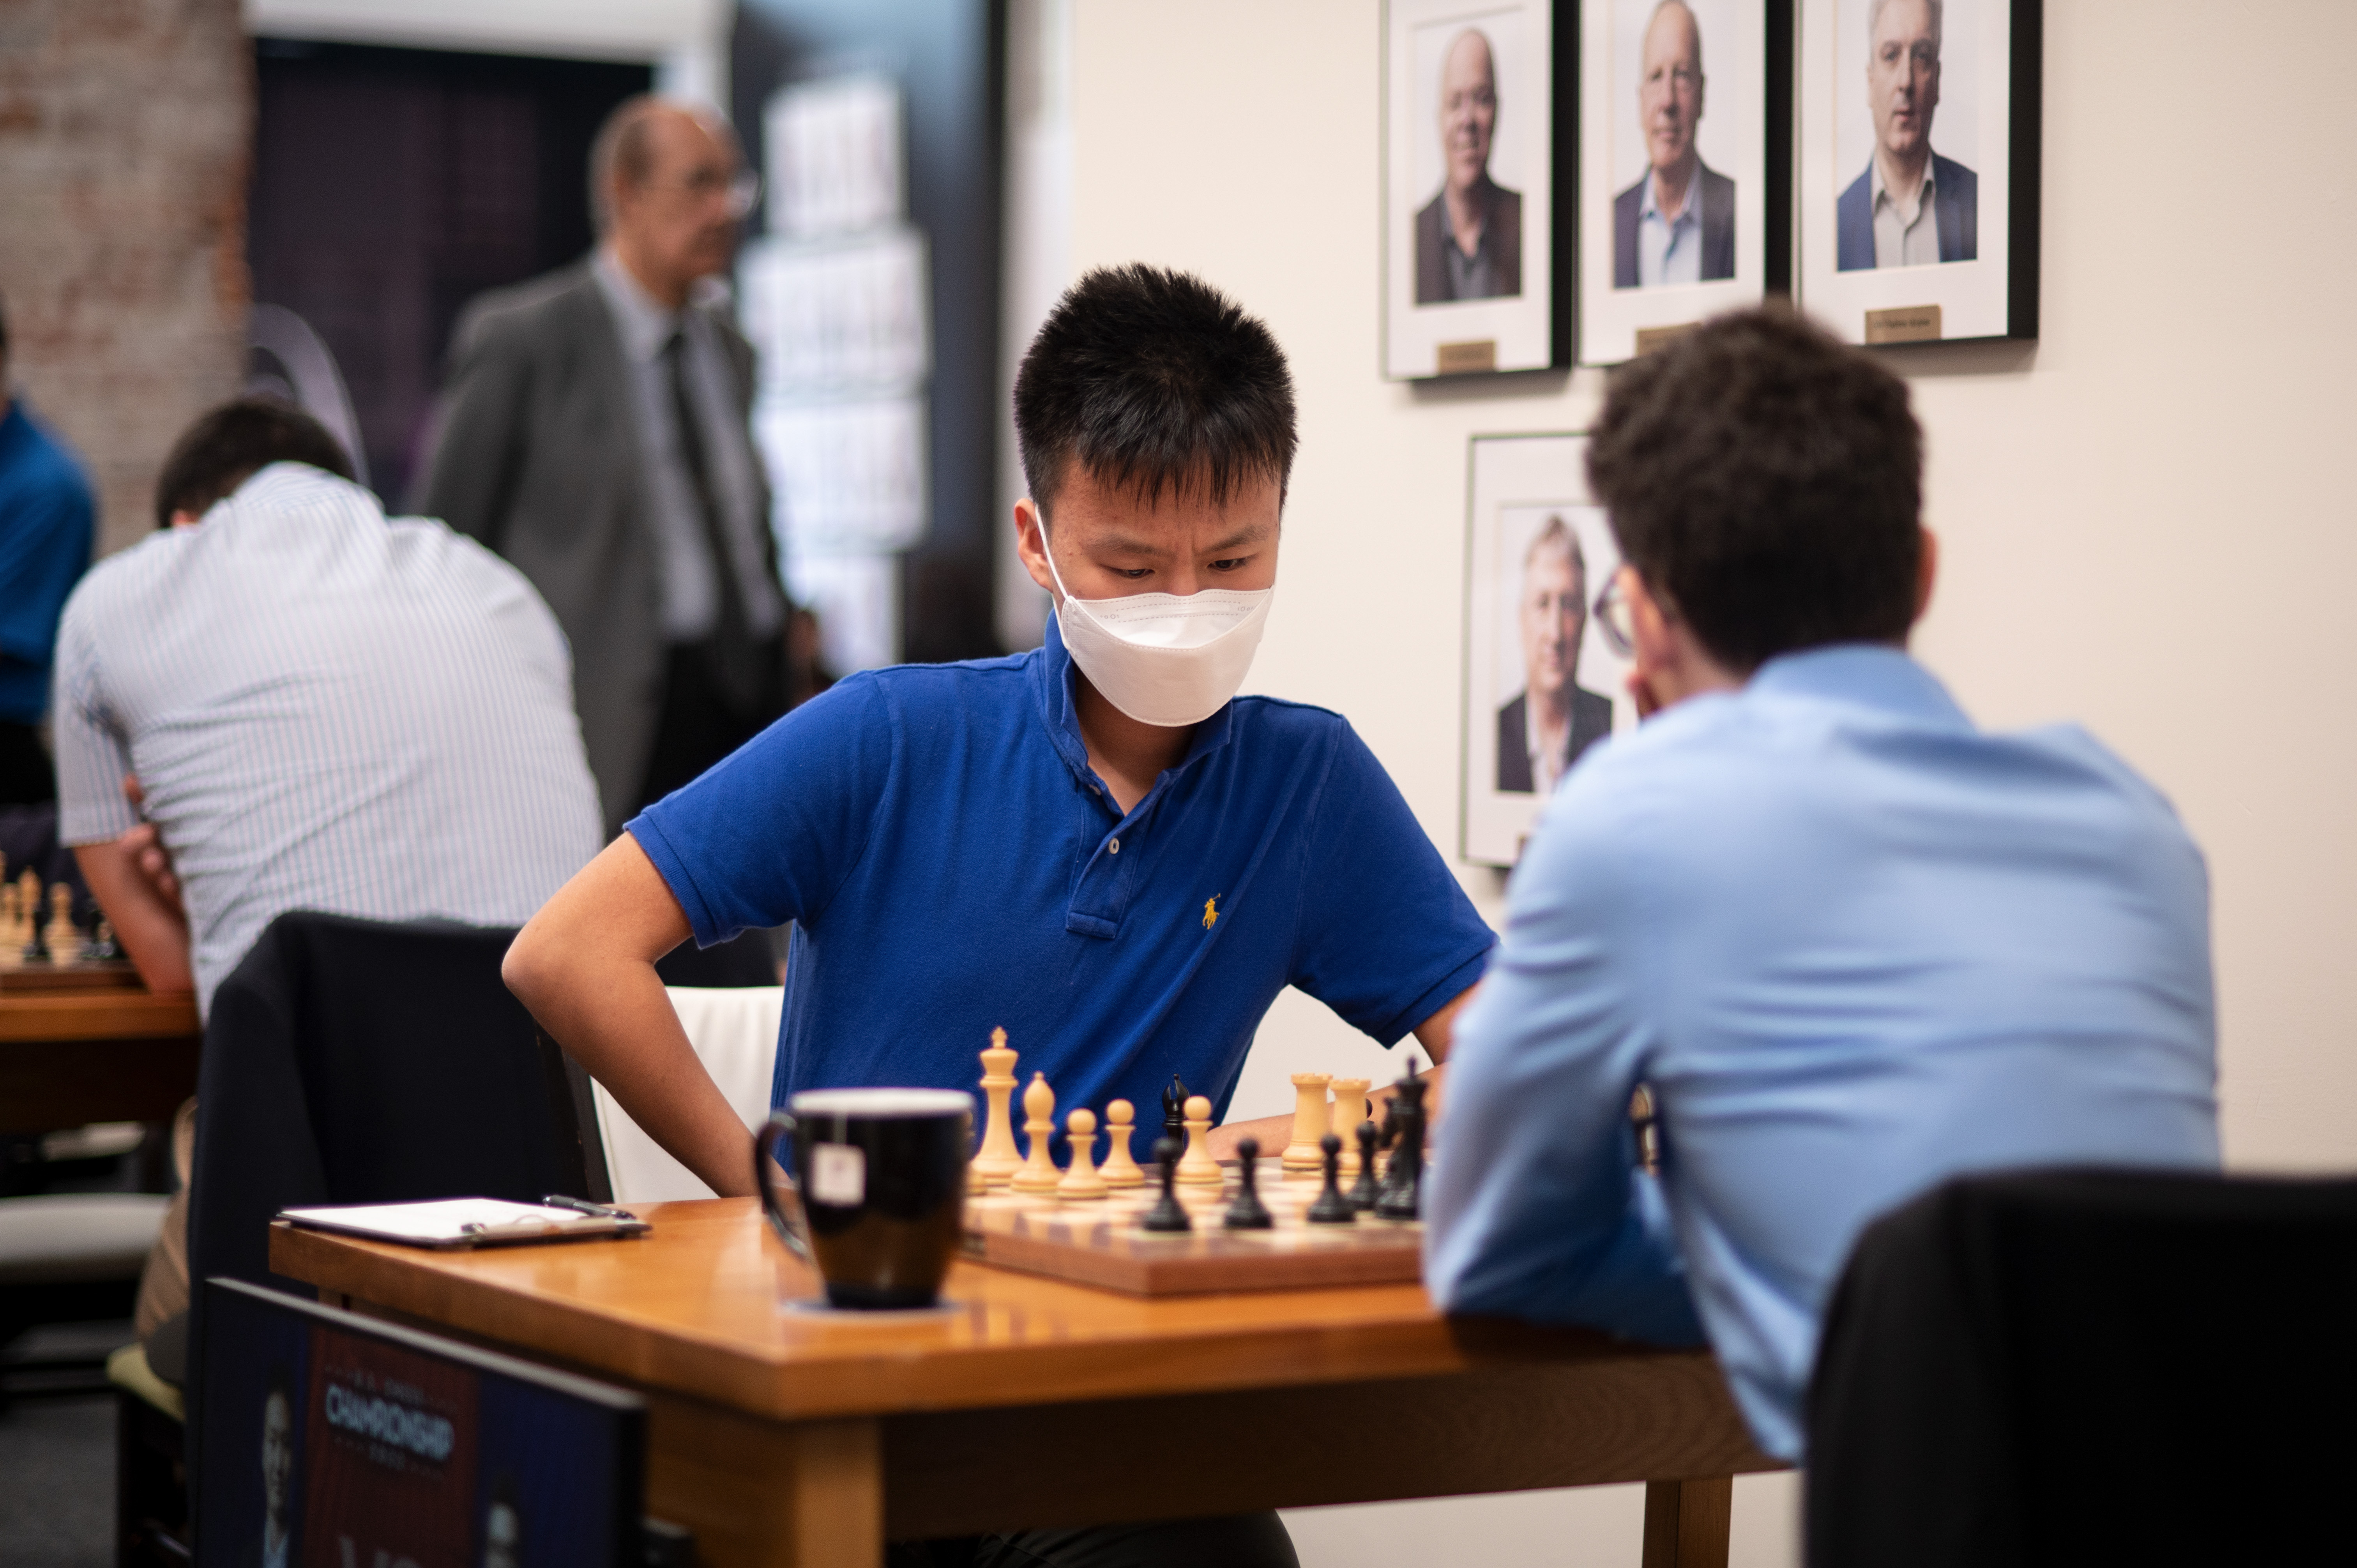 Chess player rander (from United States) - GameKnot